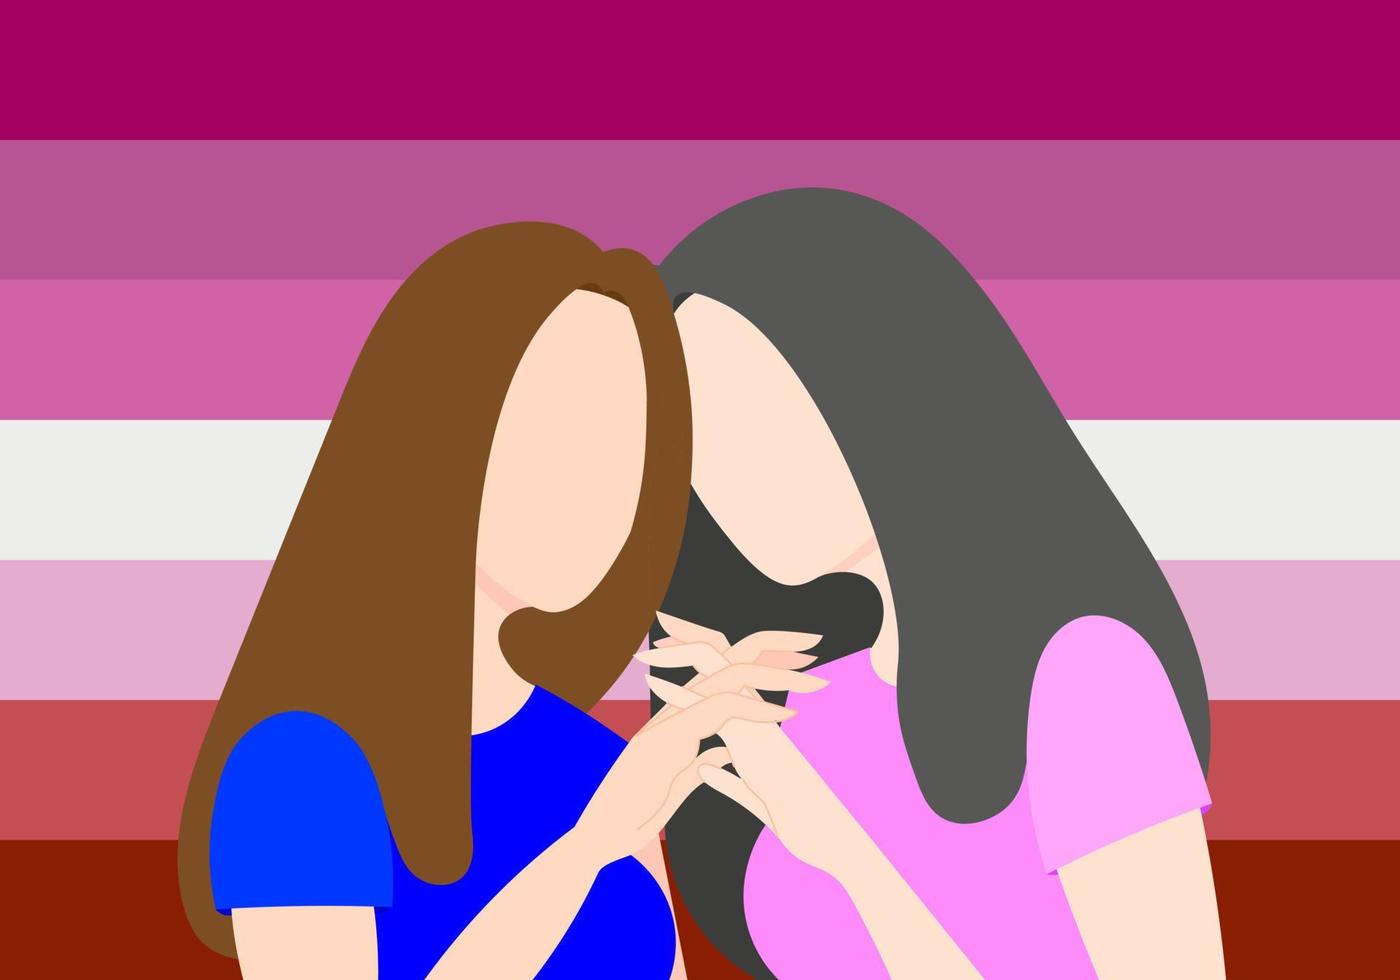 A lesbian couple in love holding hands on the background of a lesbian flag. Flat vector illustration.